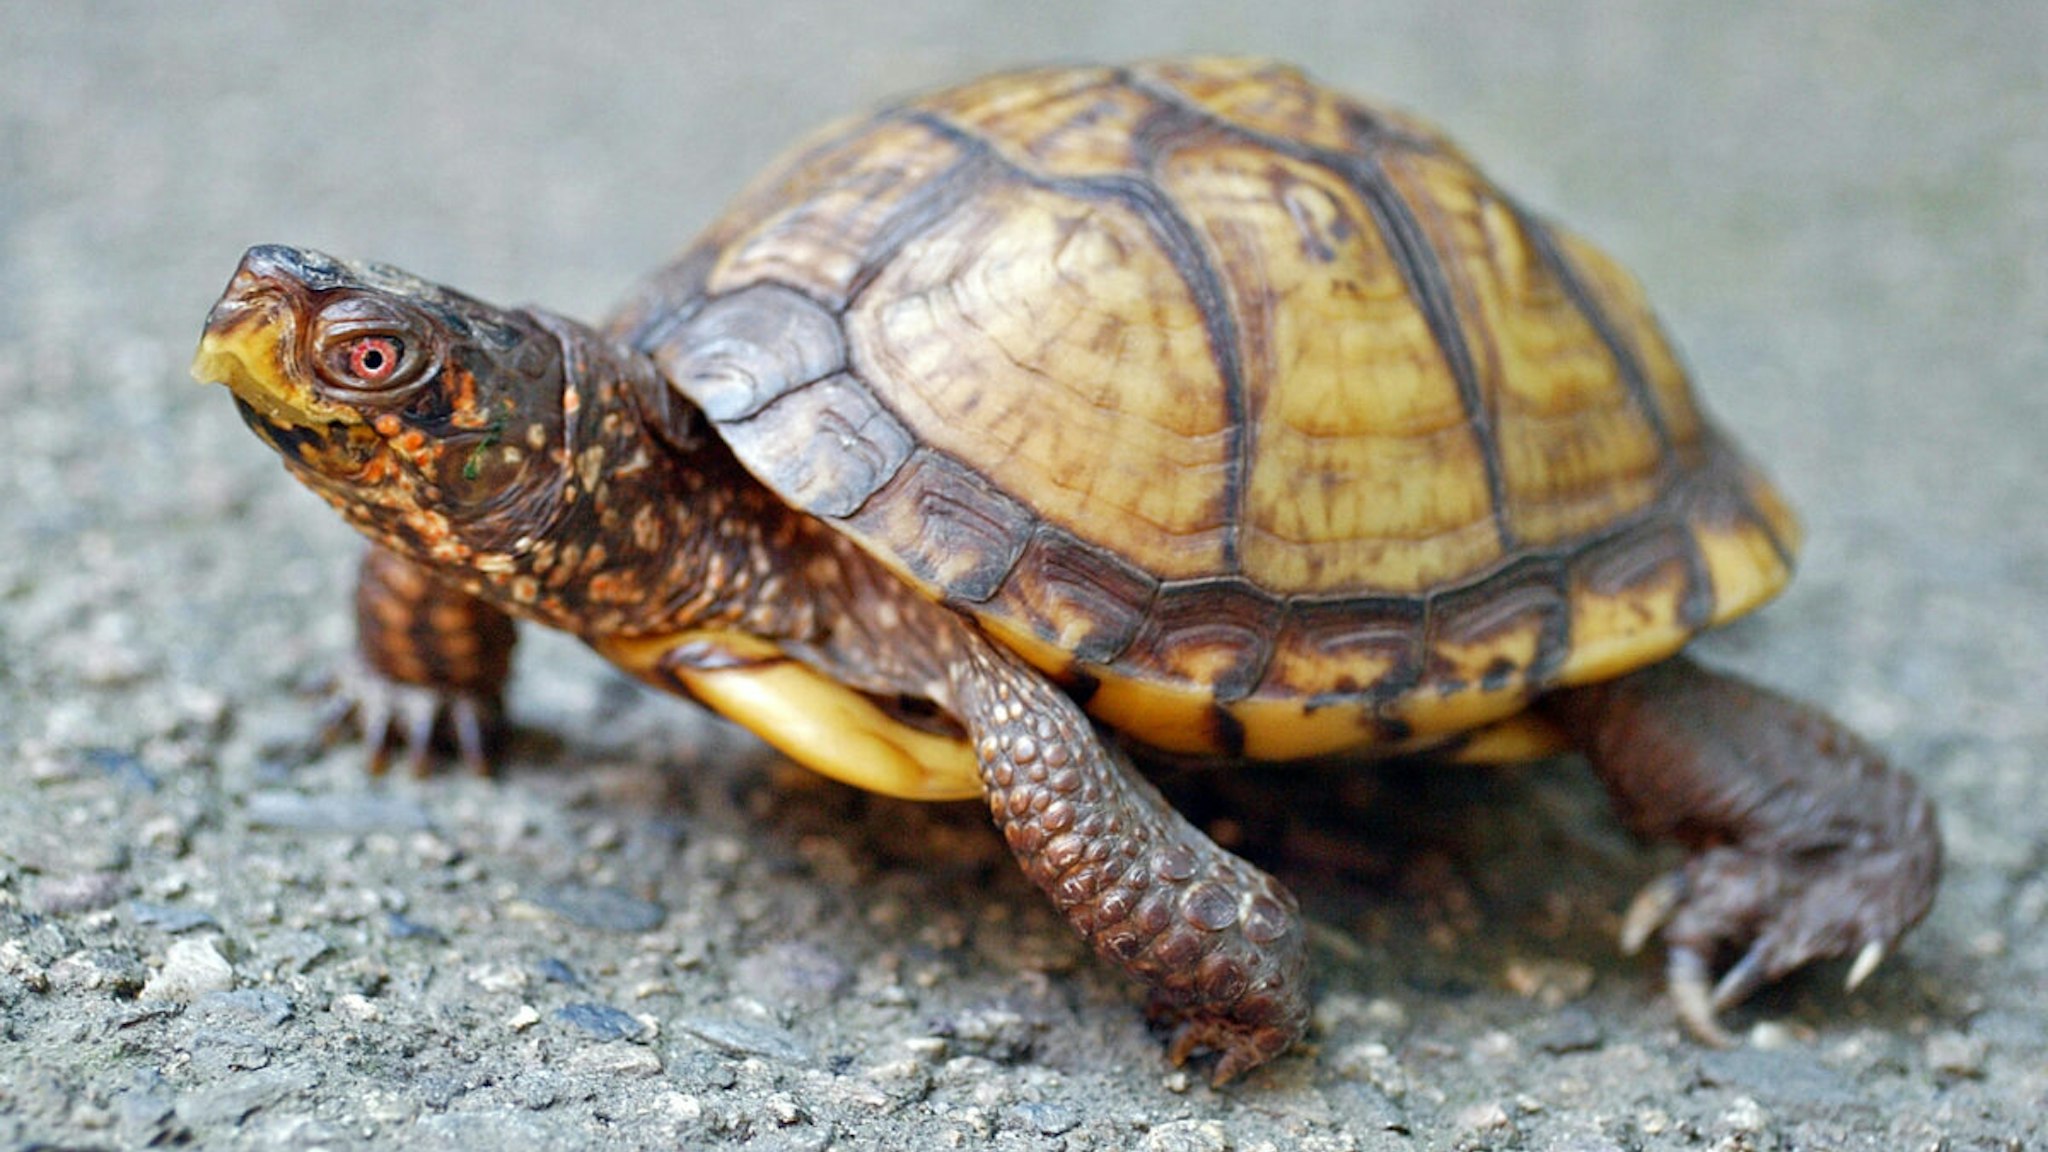 An endangered male Eastern Box Turtle named ""Tank"" who resides at the Franklin Park Zoo